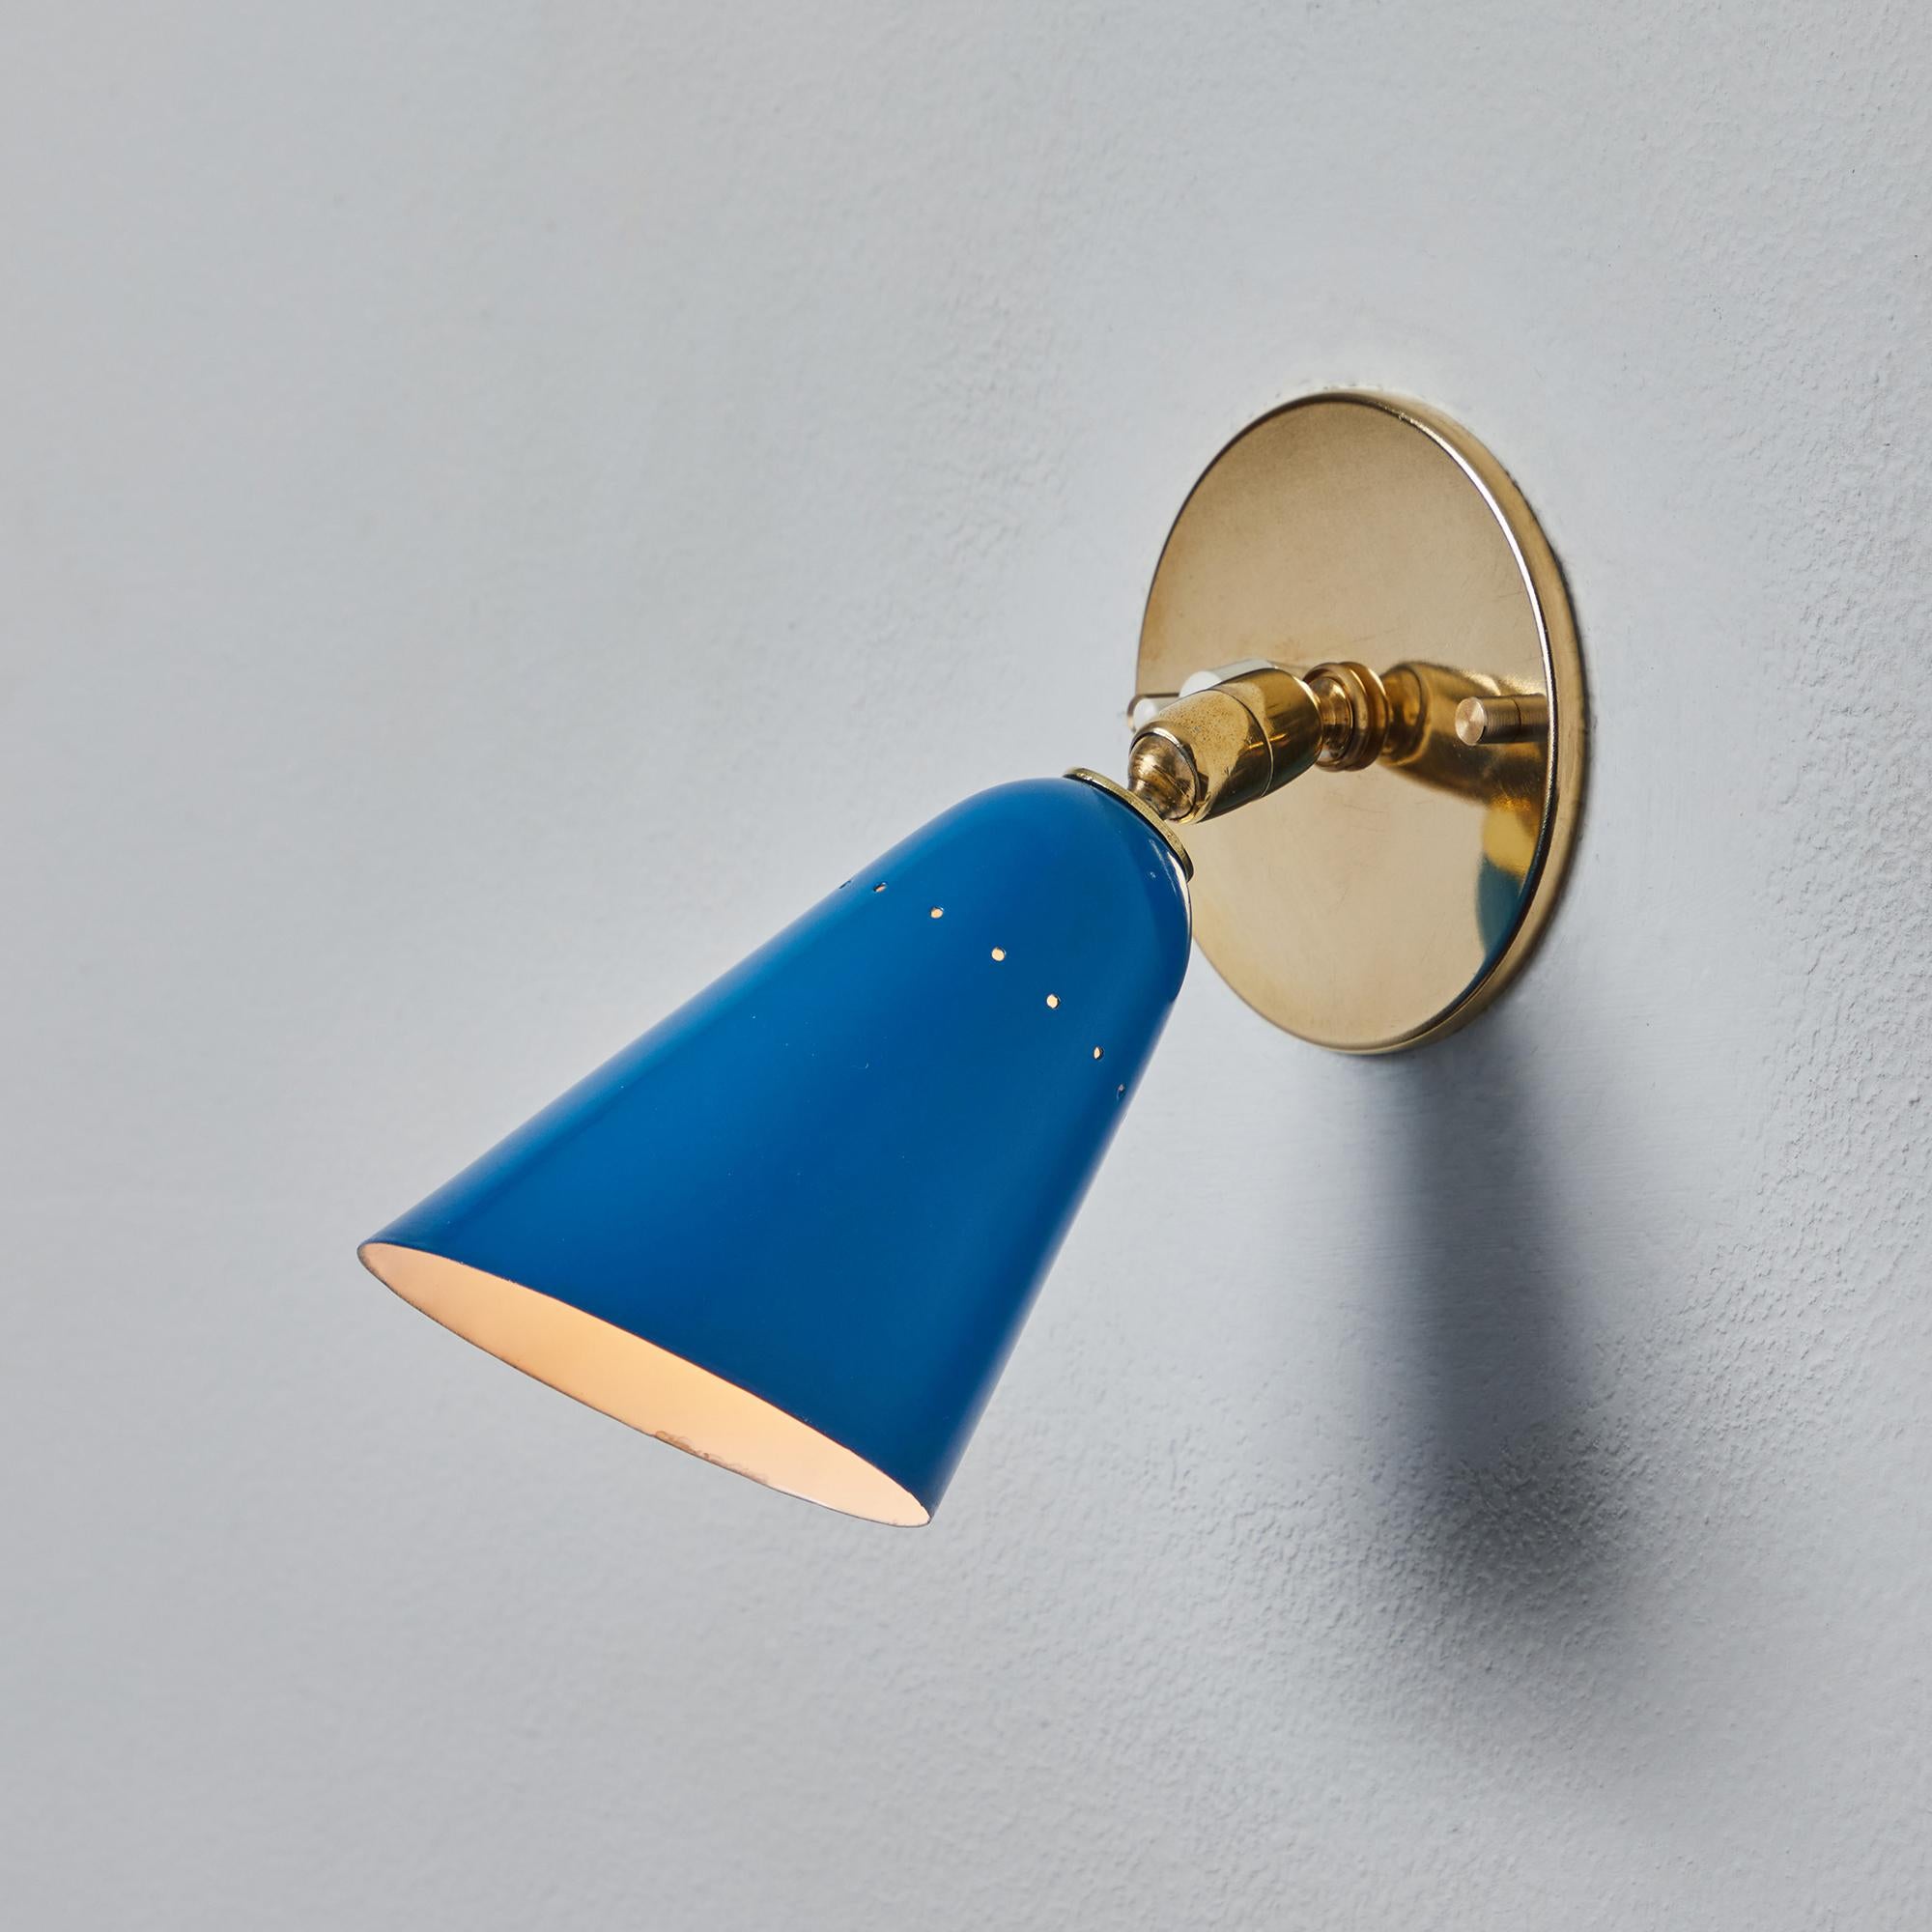 1960s Gino Sarfatti Model #26b Blue and Brass Wall Lamp for Arteluce For Sale 5